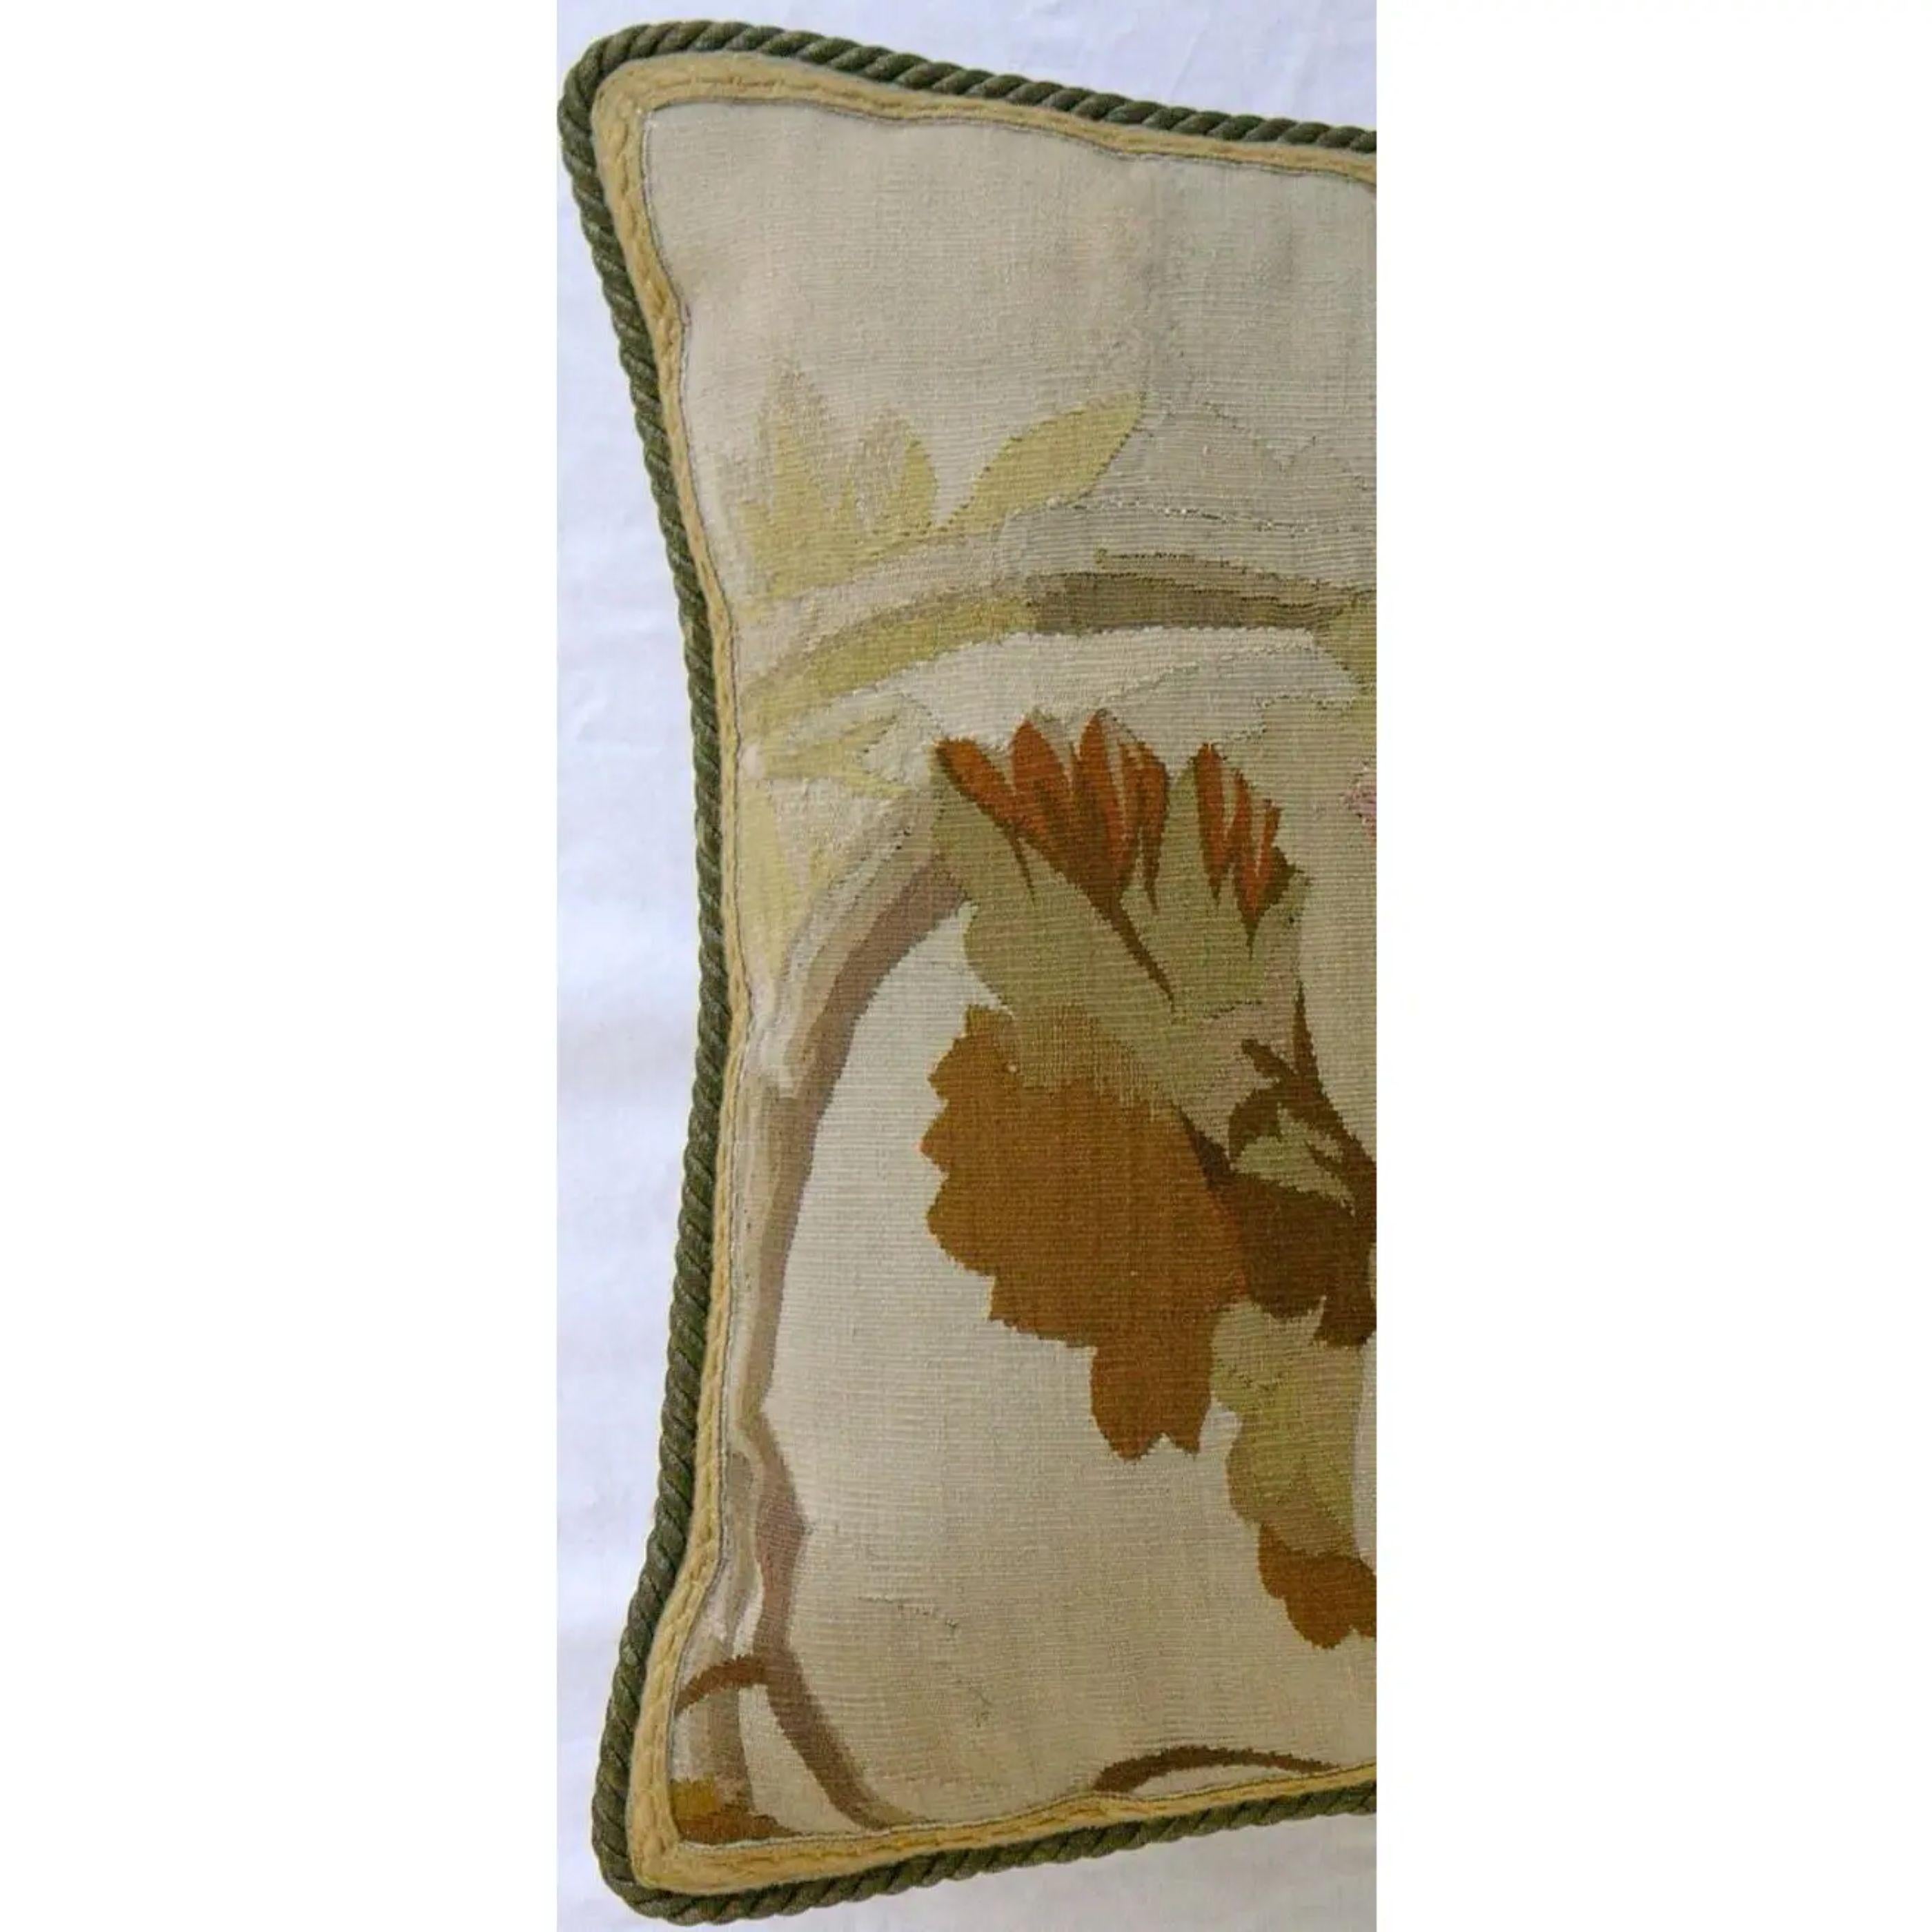 1800 Antique French Aubusson Tapestry Pillow With Grapes on Ivory Background - 2 In Good Condition For Sale In Los Angeles, US